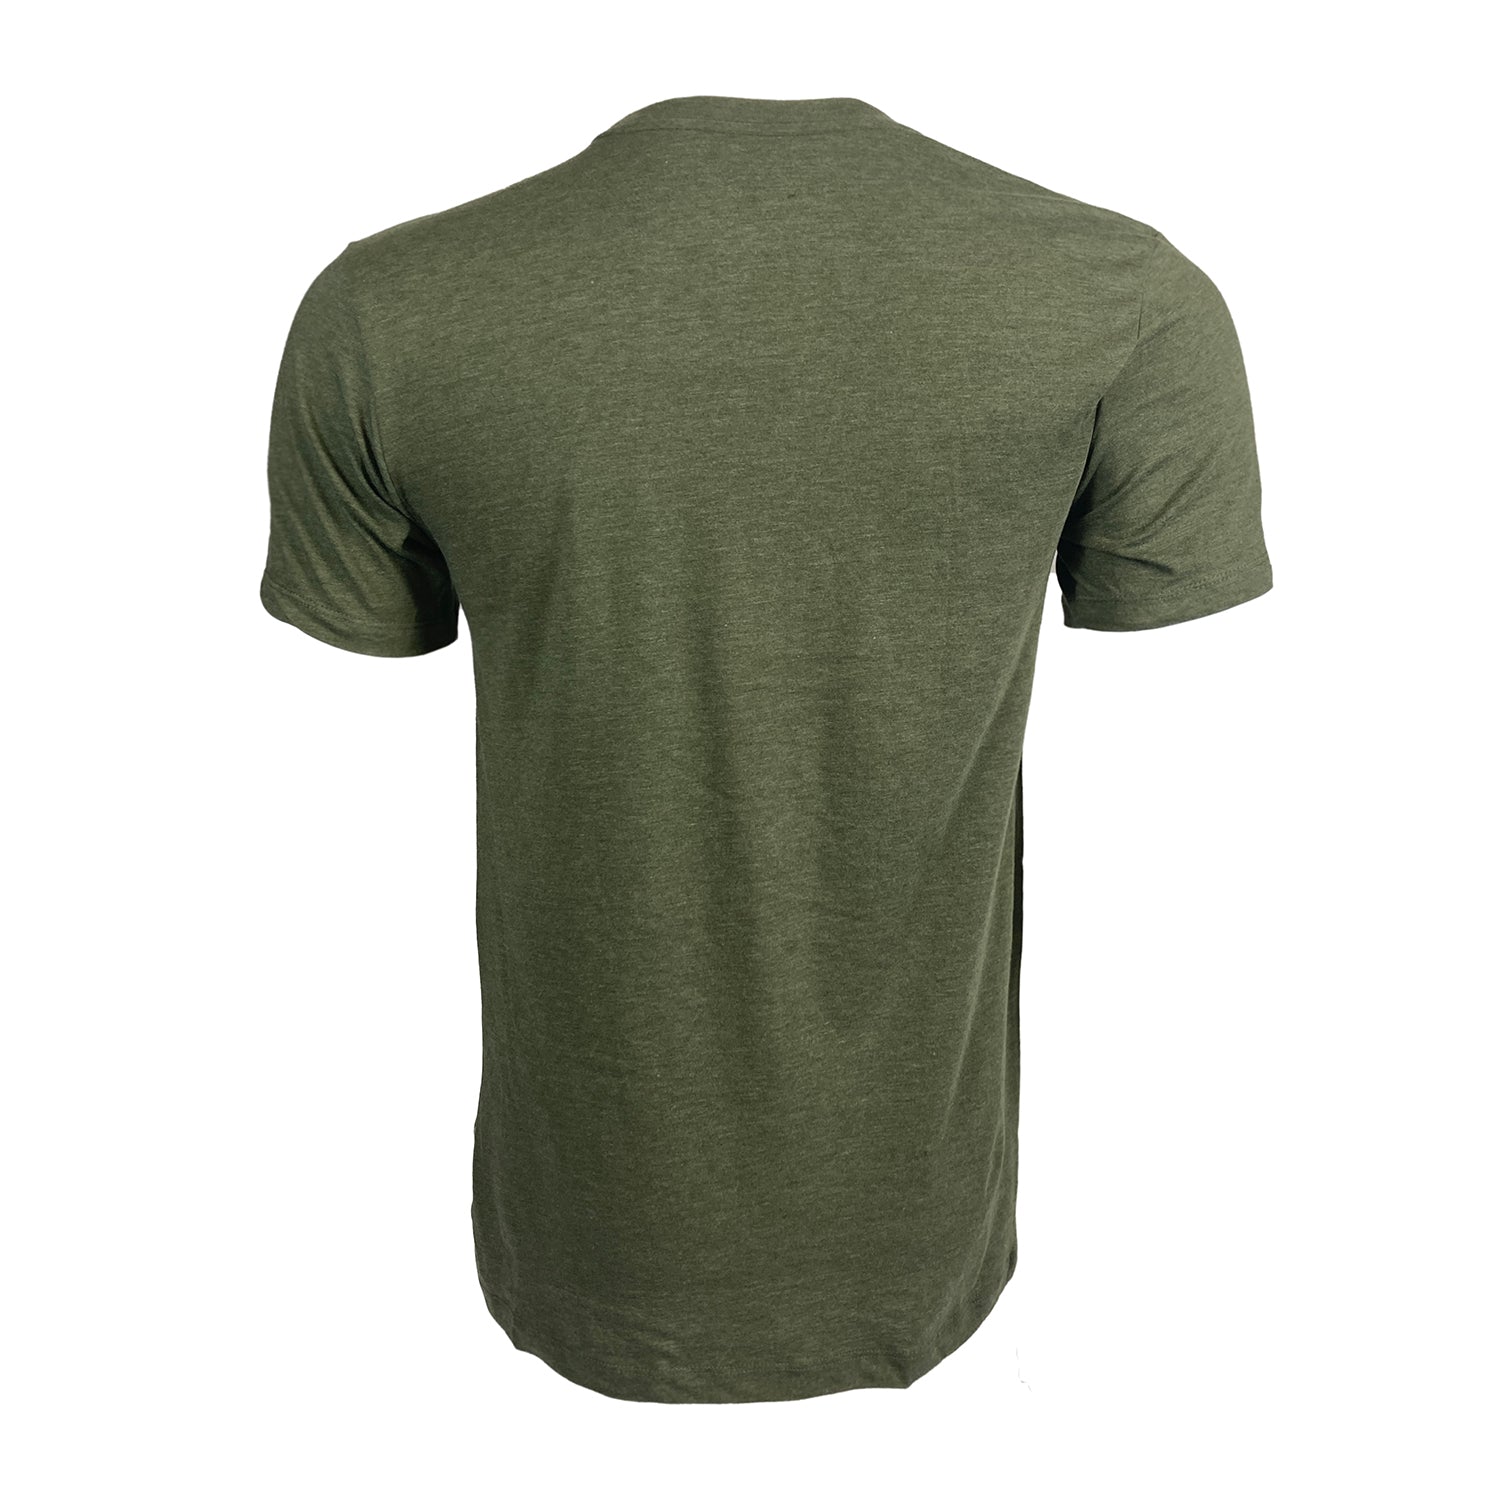 Green short sleeved tee pictured from the back